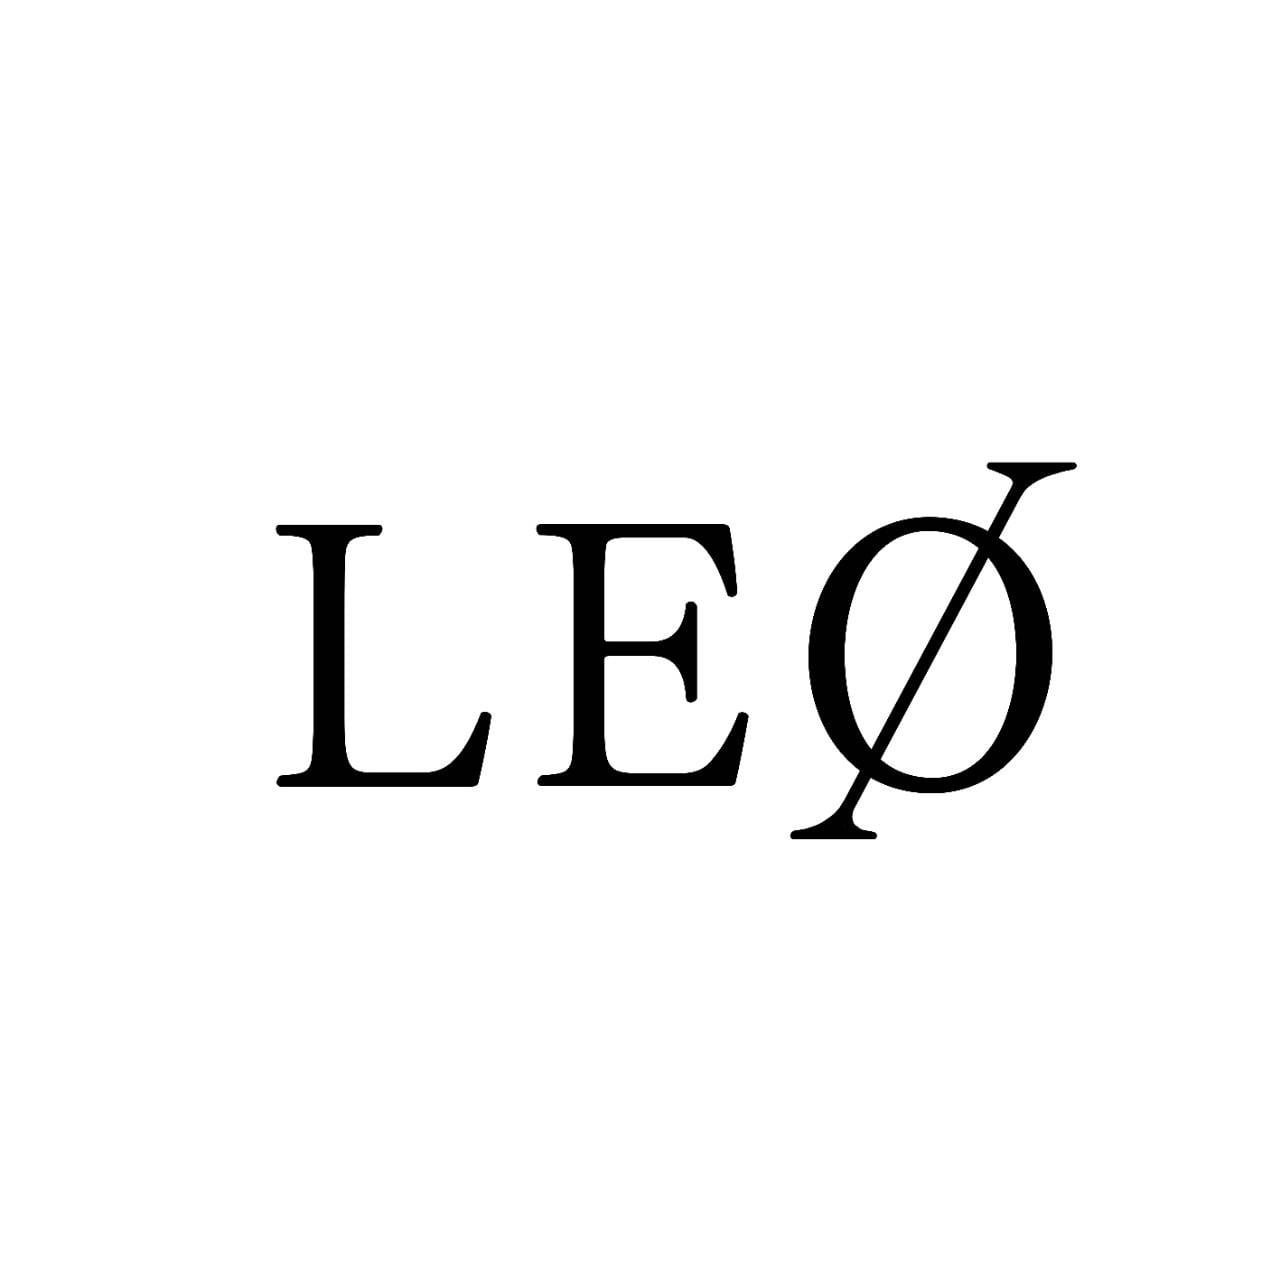 LEO official items